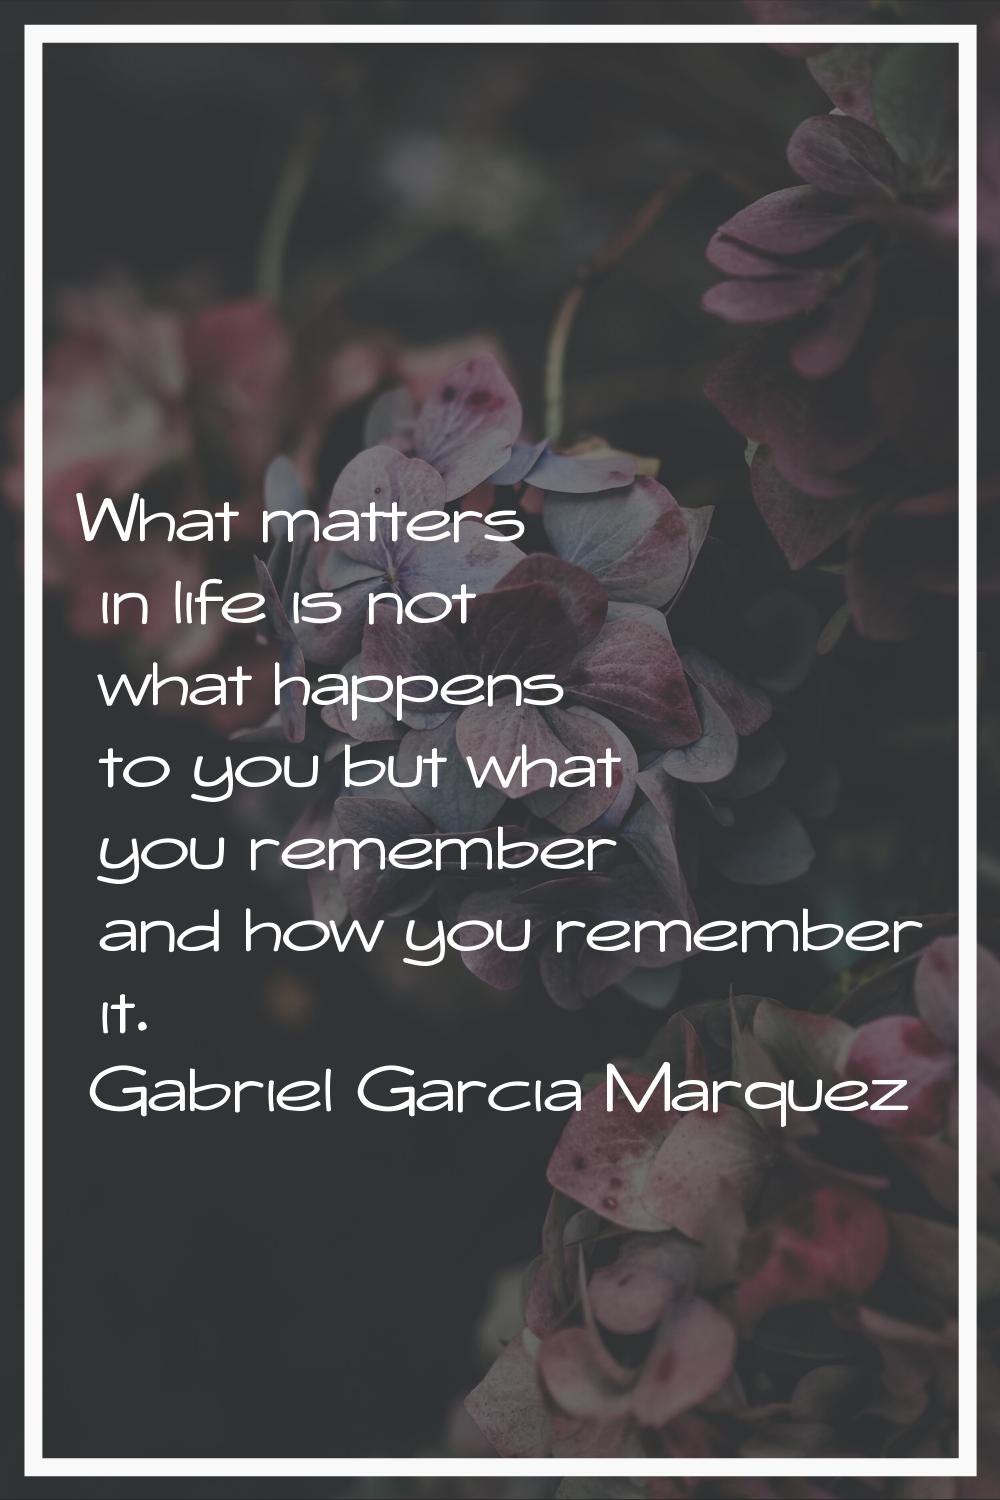 What matters in life is not what happens to you but what you remember and how you remember it.